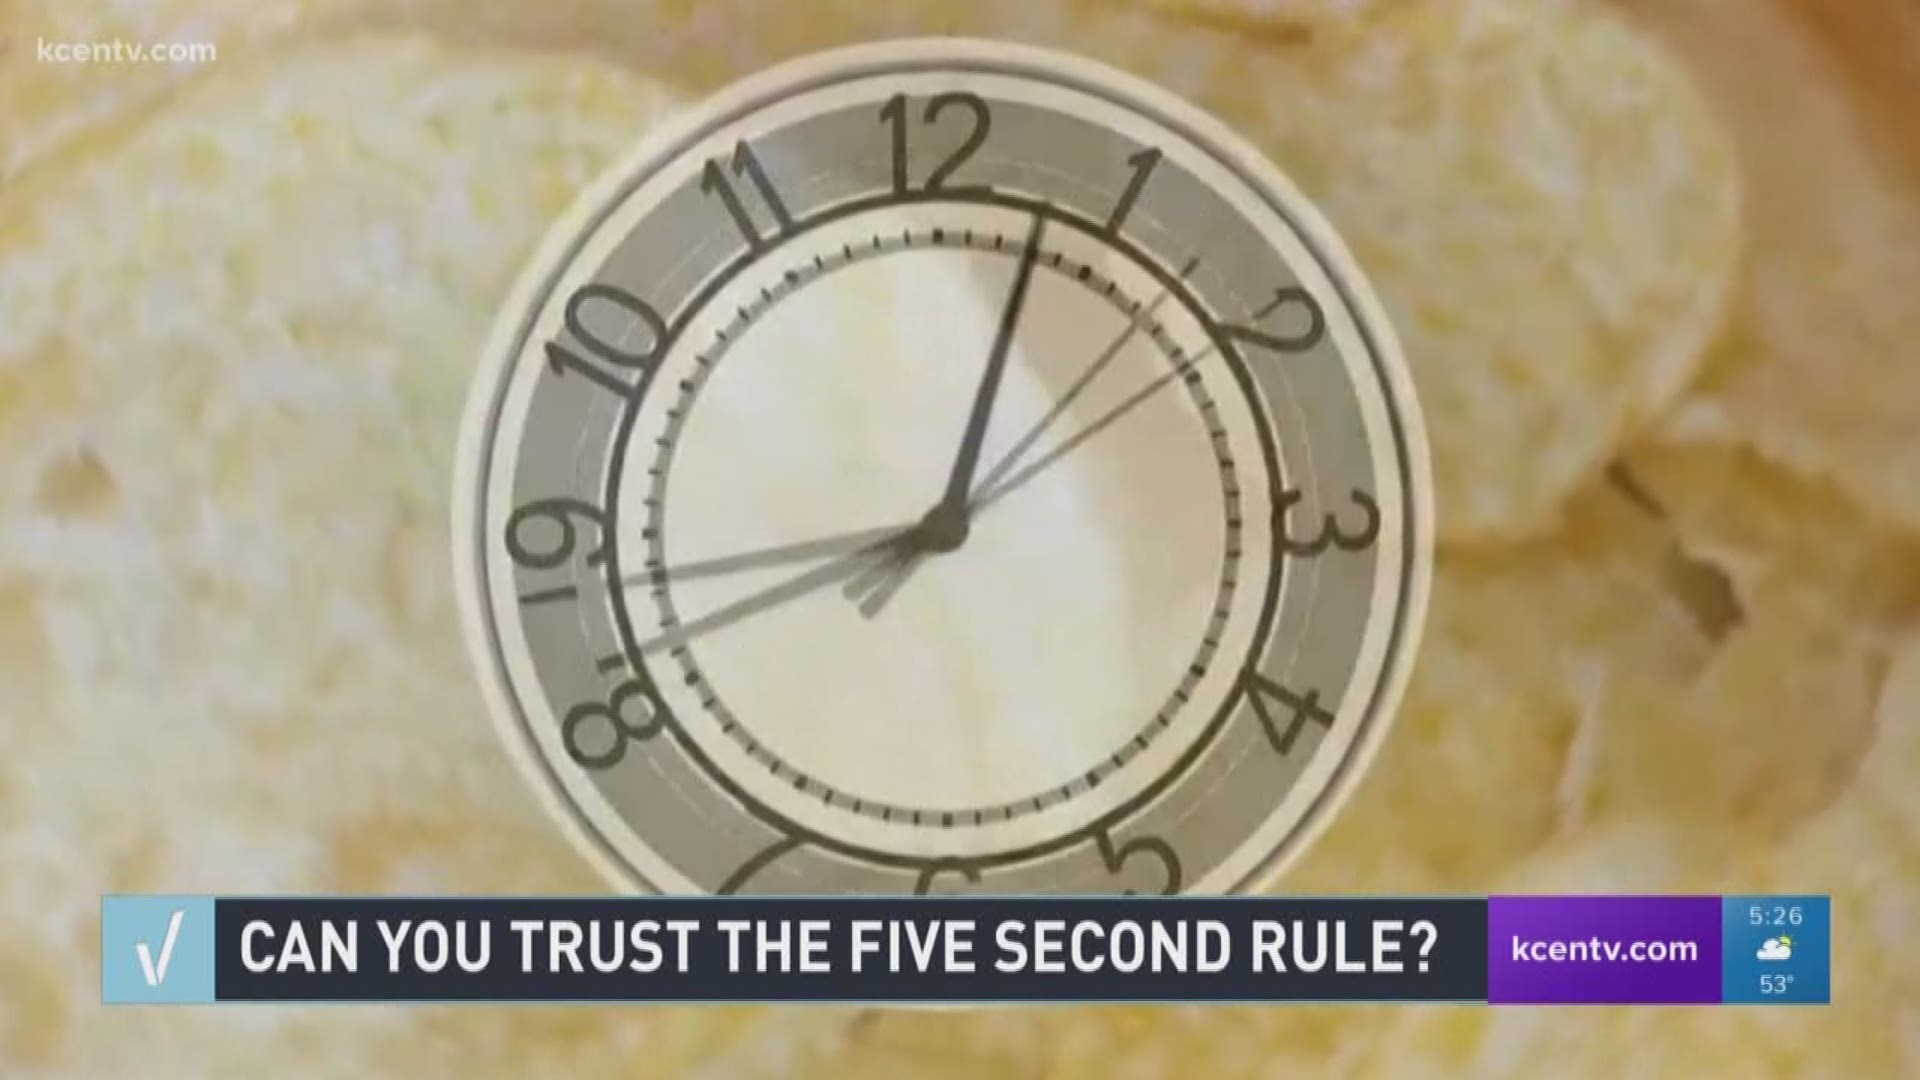 Morning anchor Chris Rogers spoke to the American Society for Microbiology to see if the 5-second rule is trustworthy.